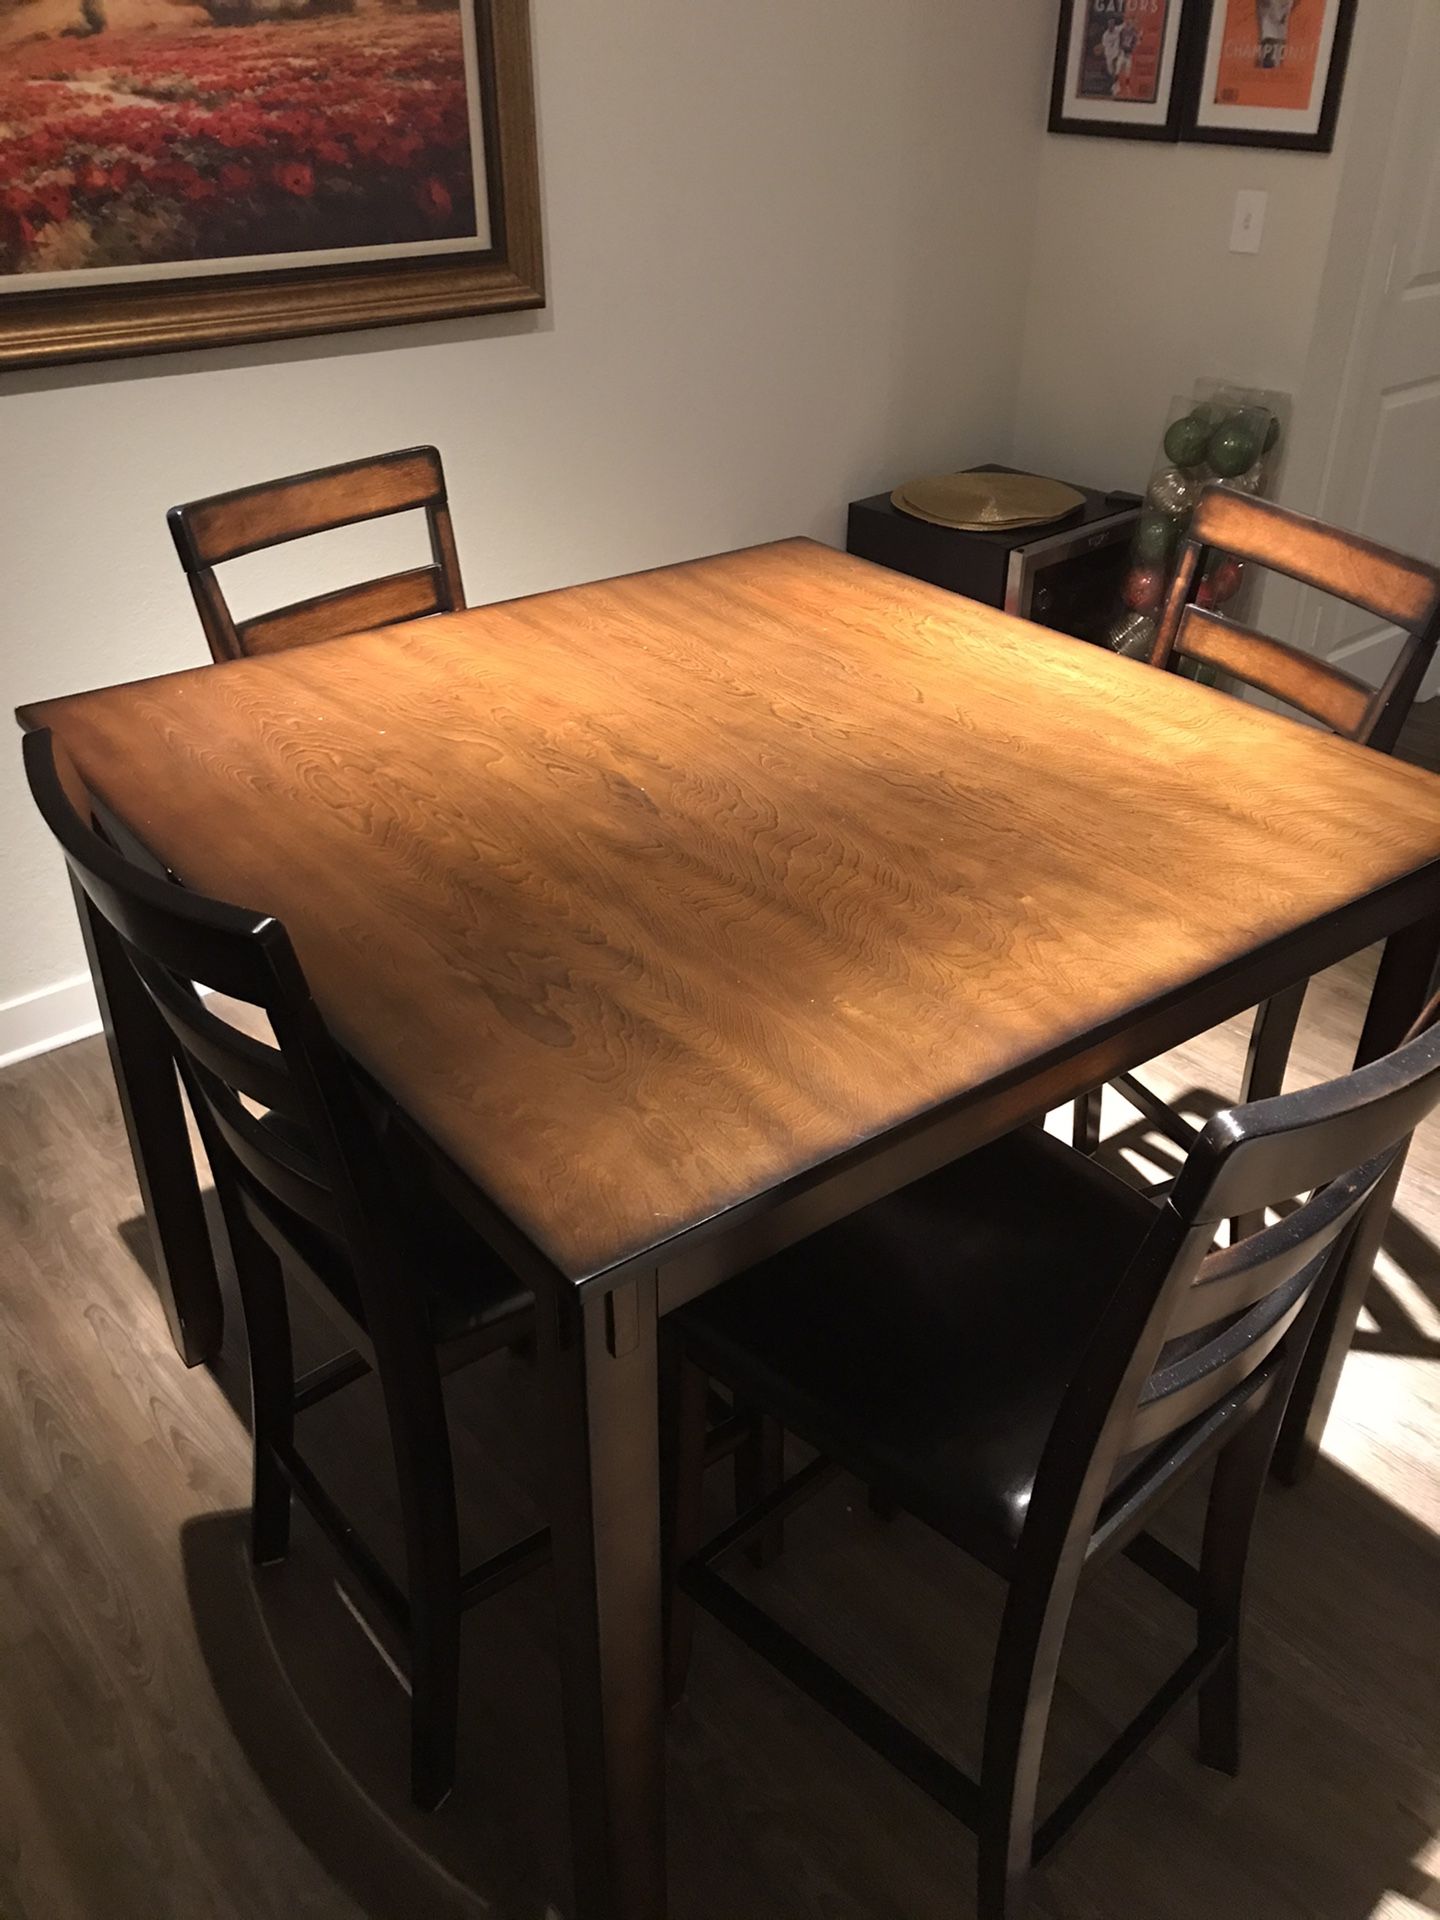 Dining Room Table - Countertop Height 4 Chairs